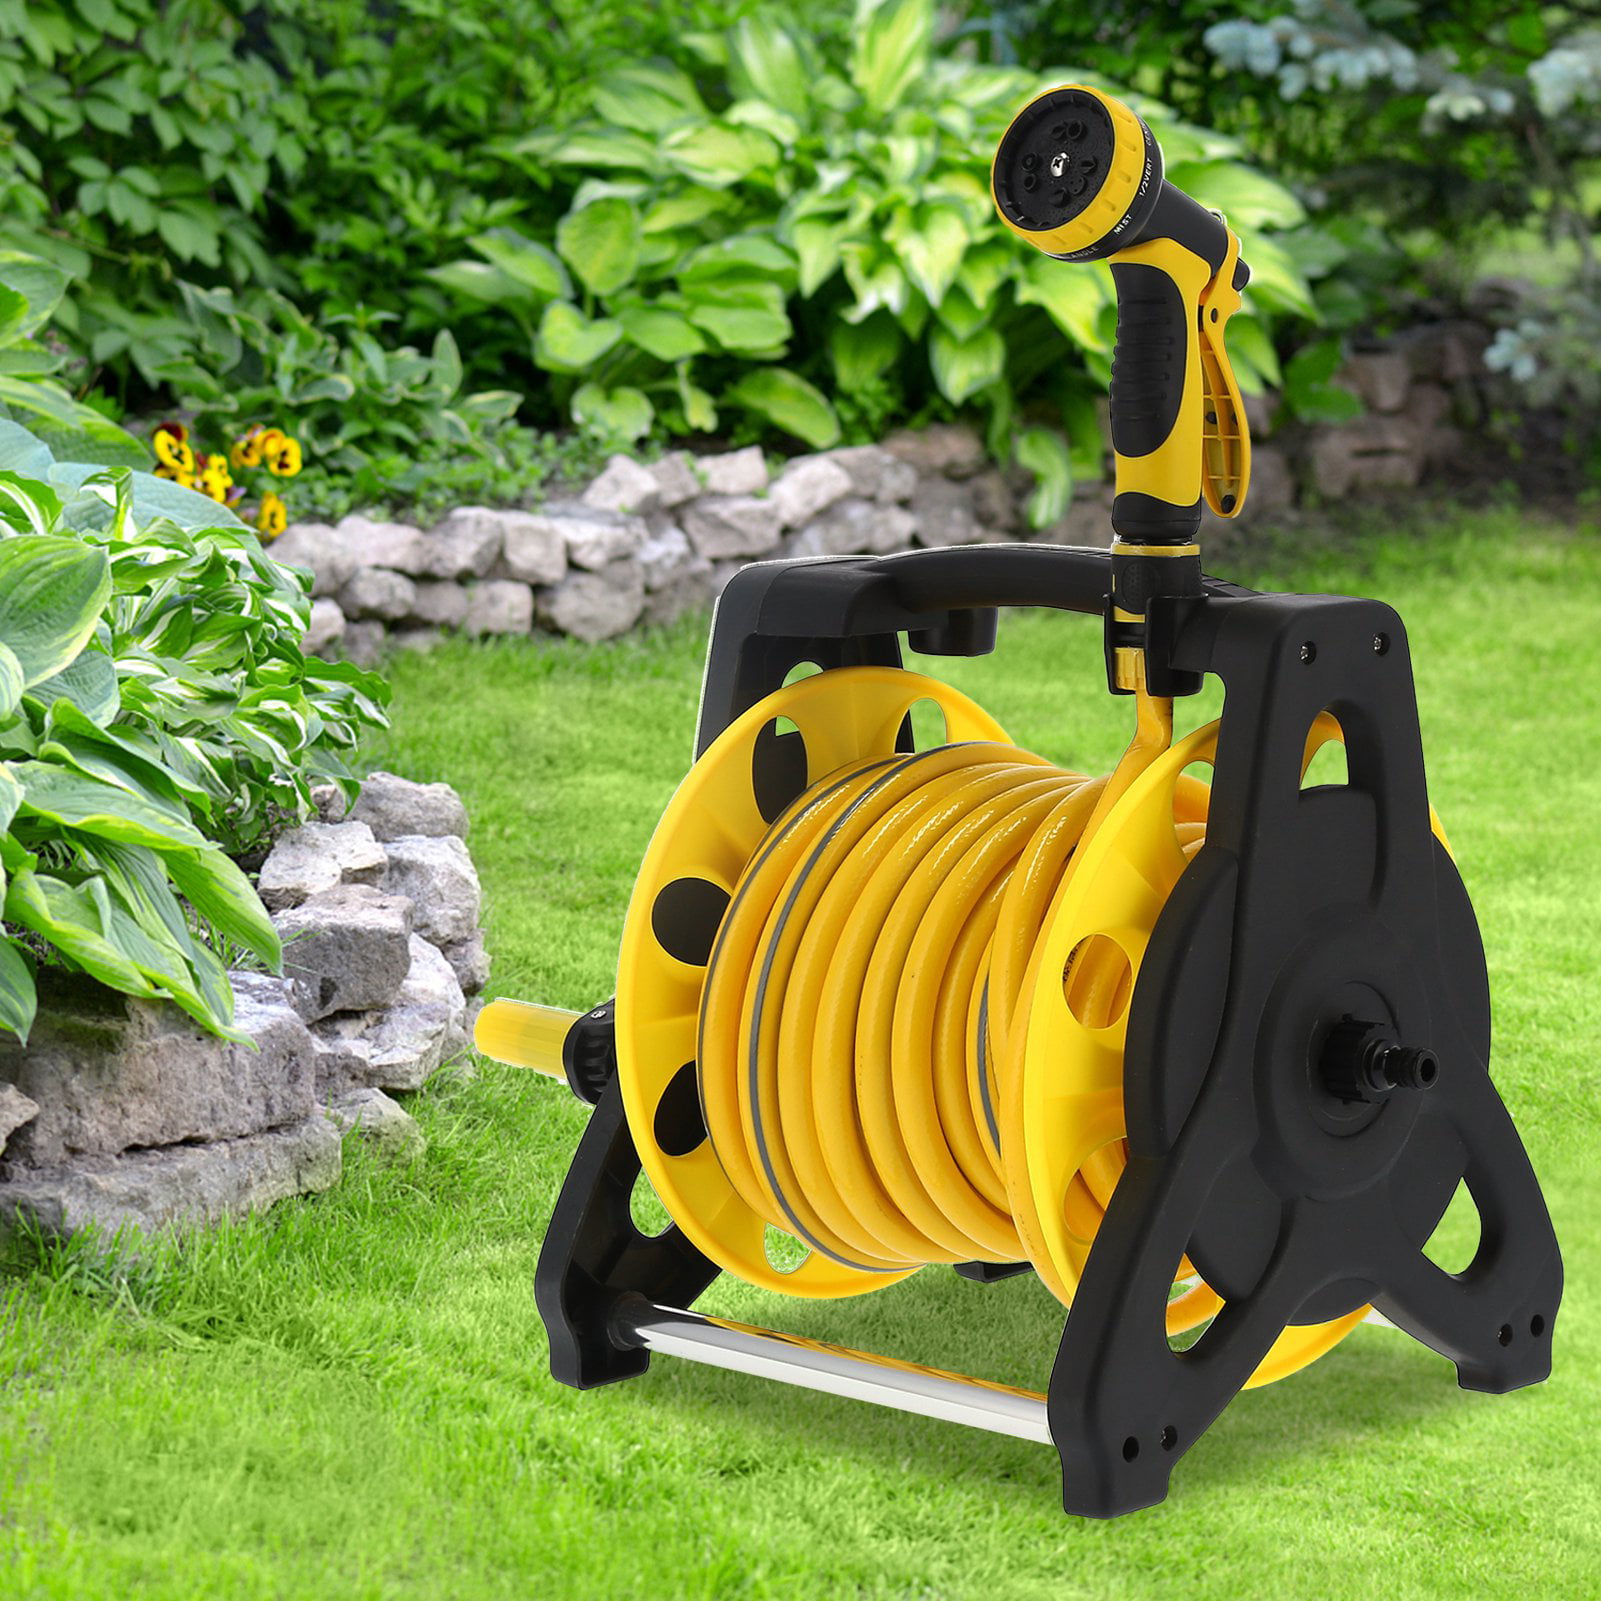 WATER HOSE WITH CARD 45M ASSEMBLED HOSE CART REEL WITH 20M HOSE GARDEN FLOWERS 